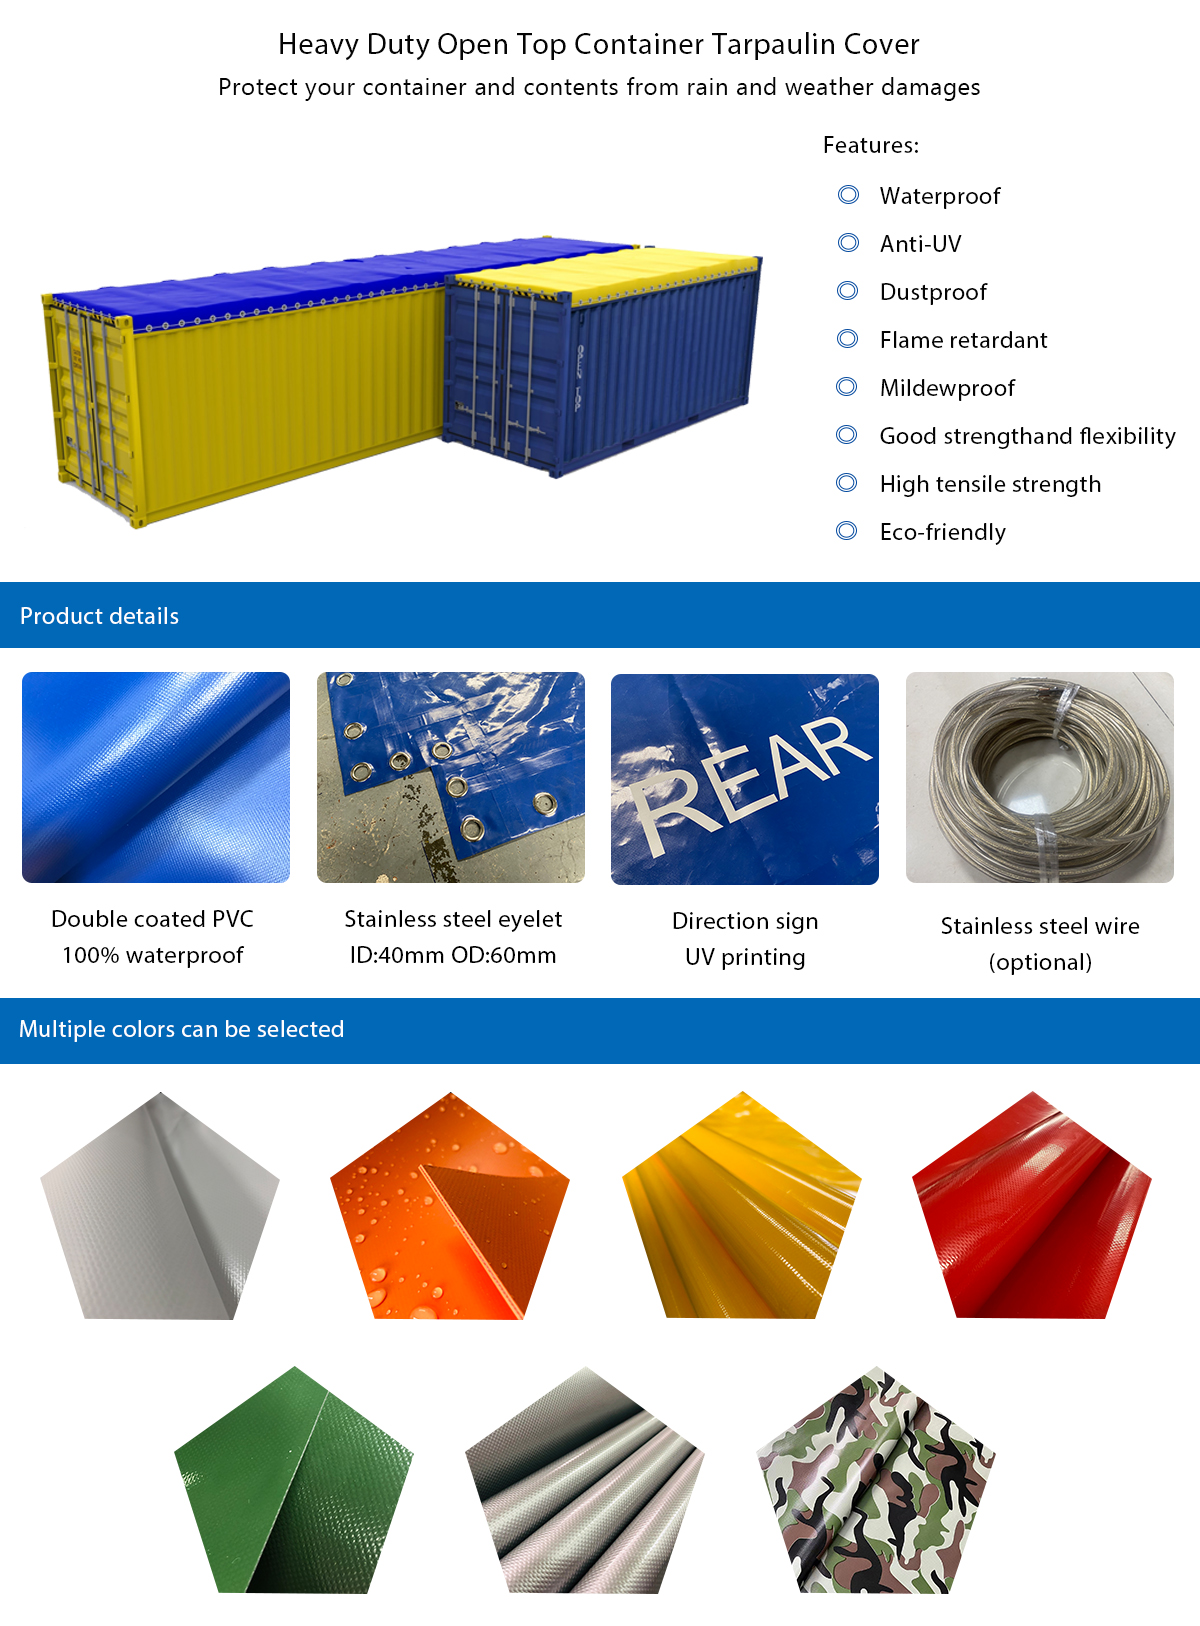 40ft container tarpaulin cover,20ft container tarpaulin cover,PVC tarpaulin cover,waterproof tarpaulin cover,shipping container tarp roof,shipping container tarp covers